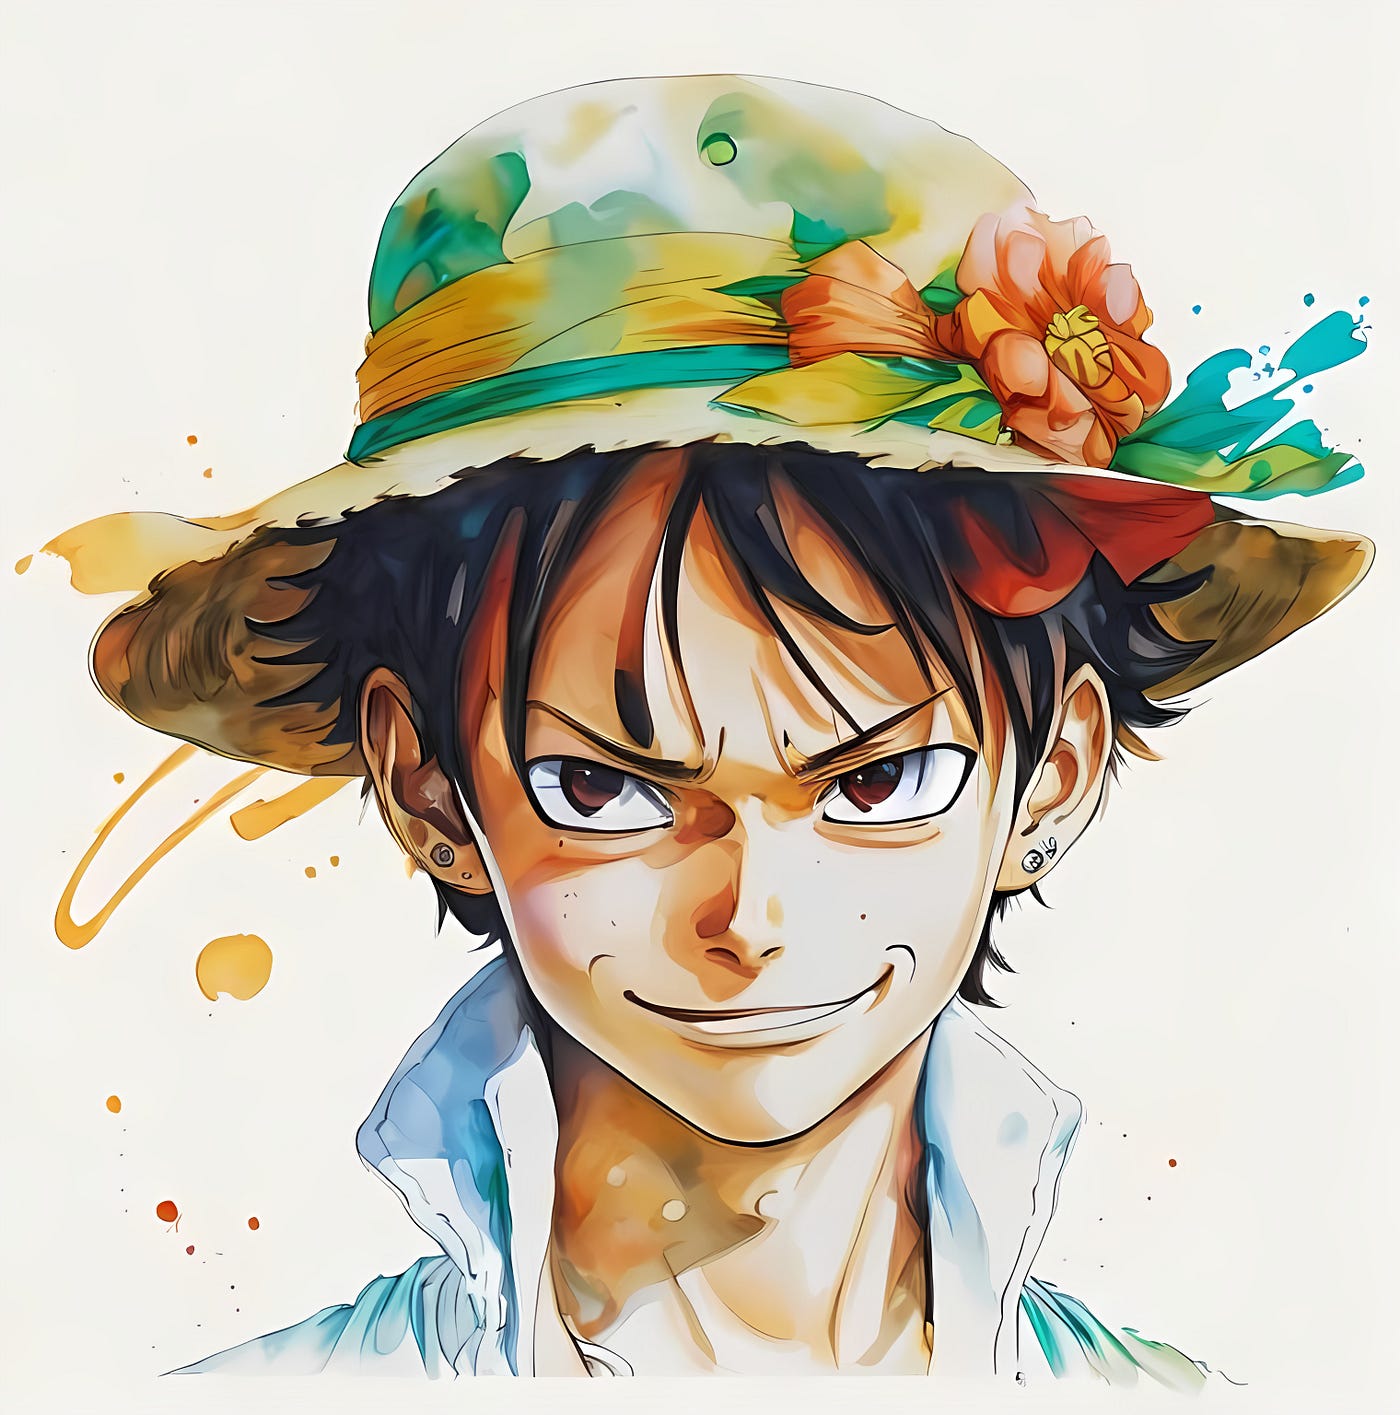 one piece side blog — the straw hat pirates in ep. 1000